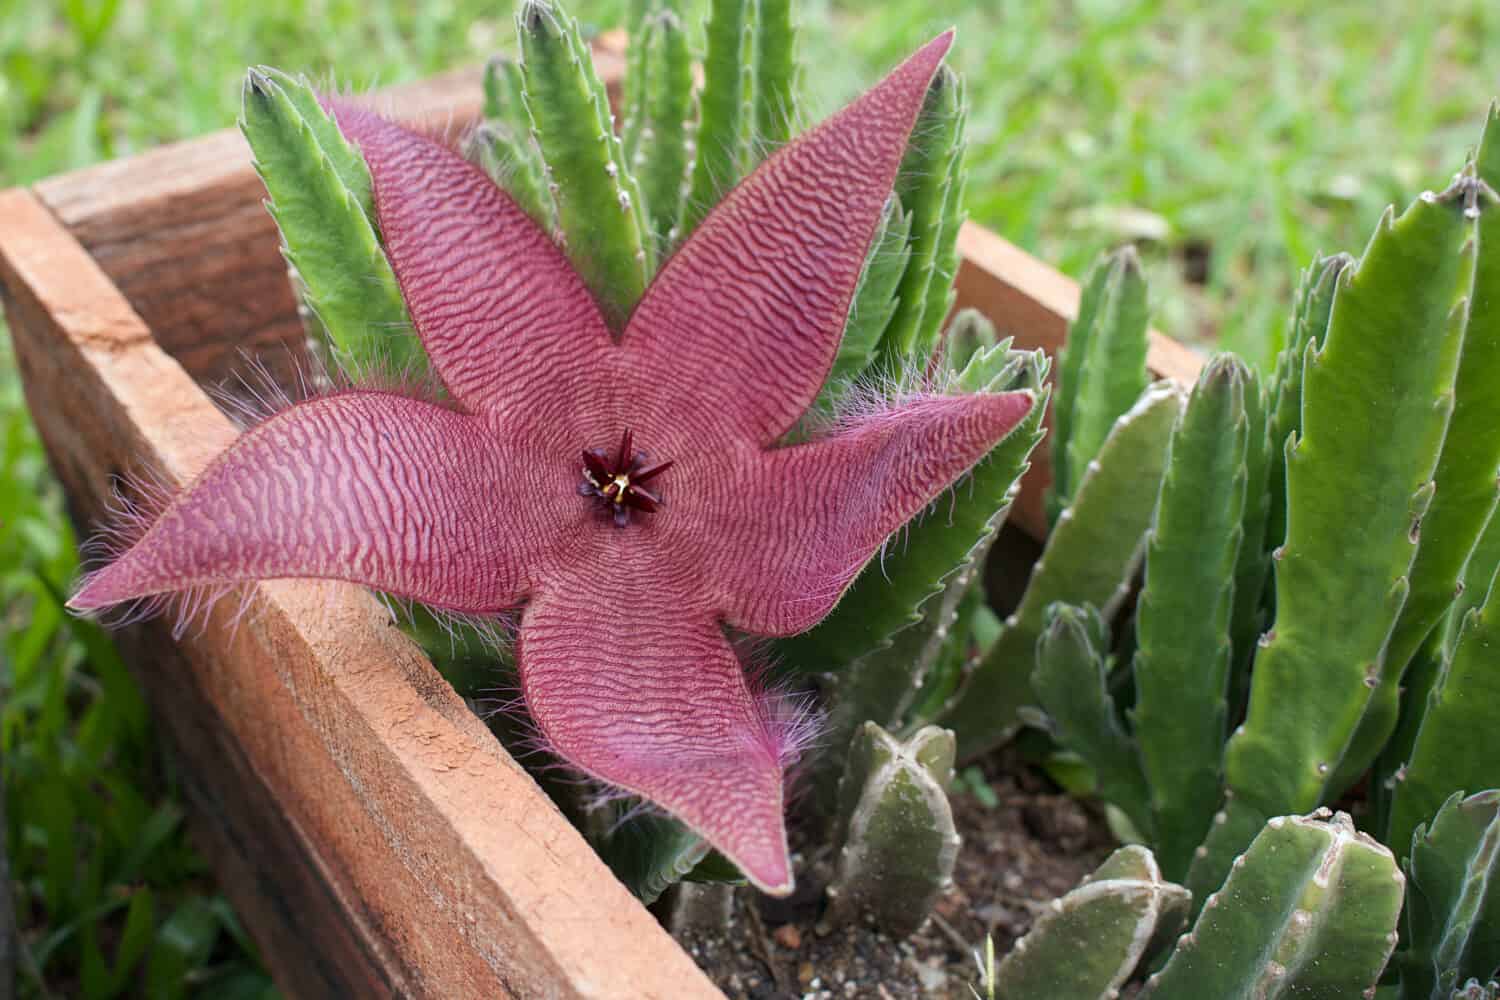 Stapelia hirsuta flower (starfish flower or carrion plant), is a species  whose flowers are flat, very hairy, dark-red and resemble rotting meat (the smell attracts many pollinators, like flies.